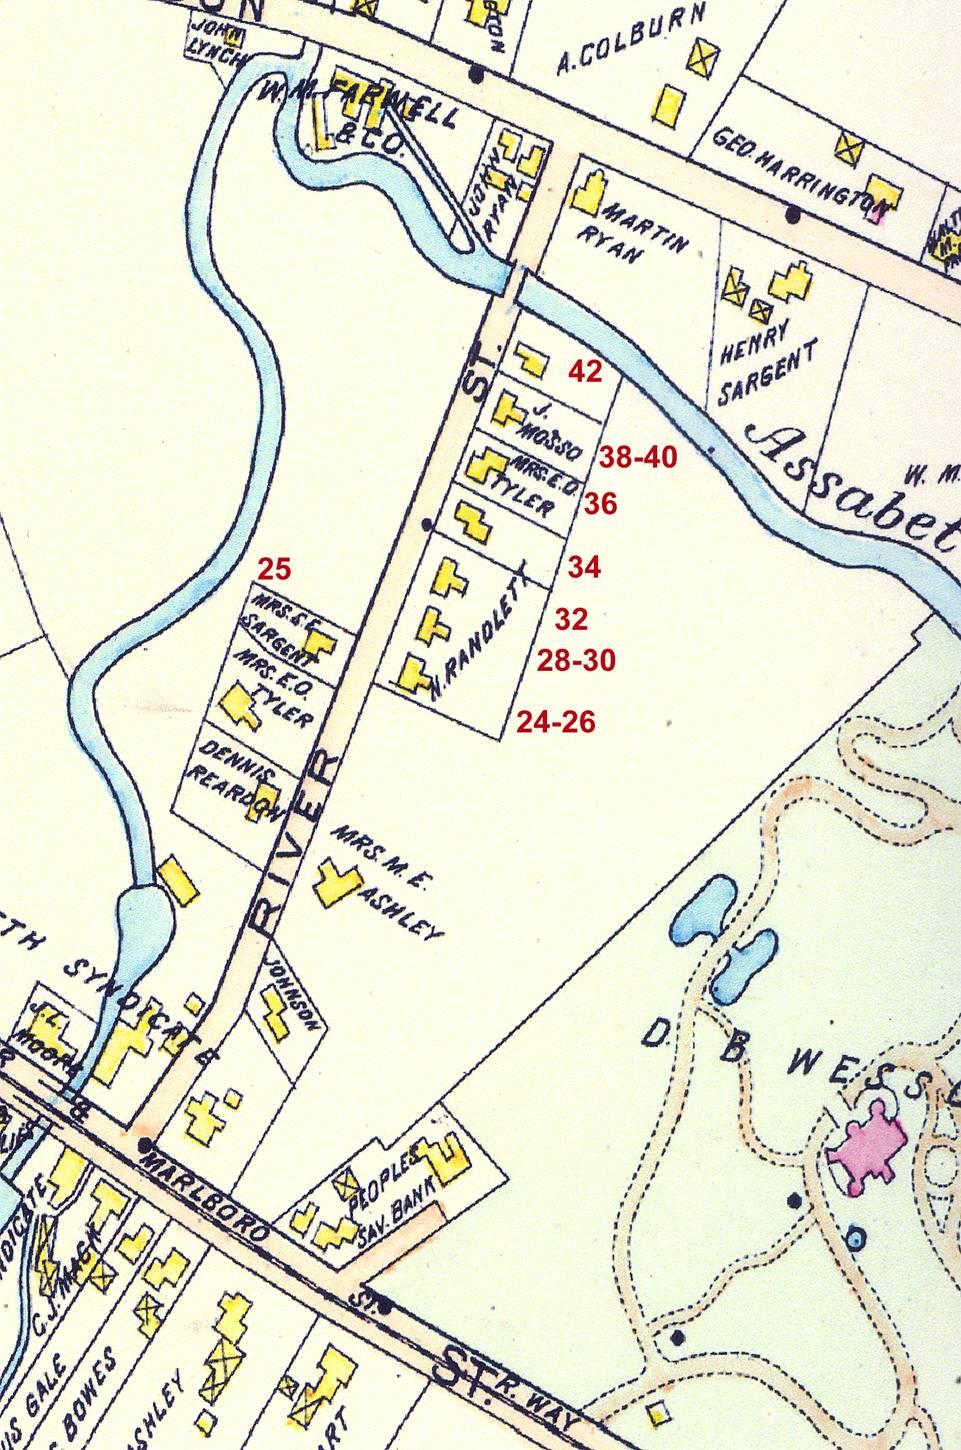 Figure 2: River Street as shown on the 1898 Richards map;